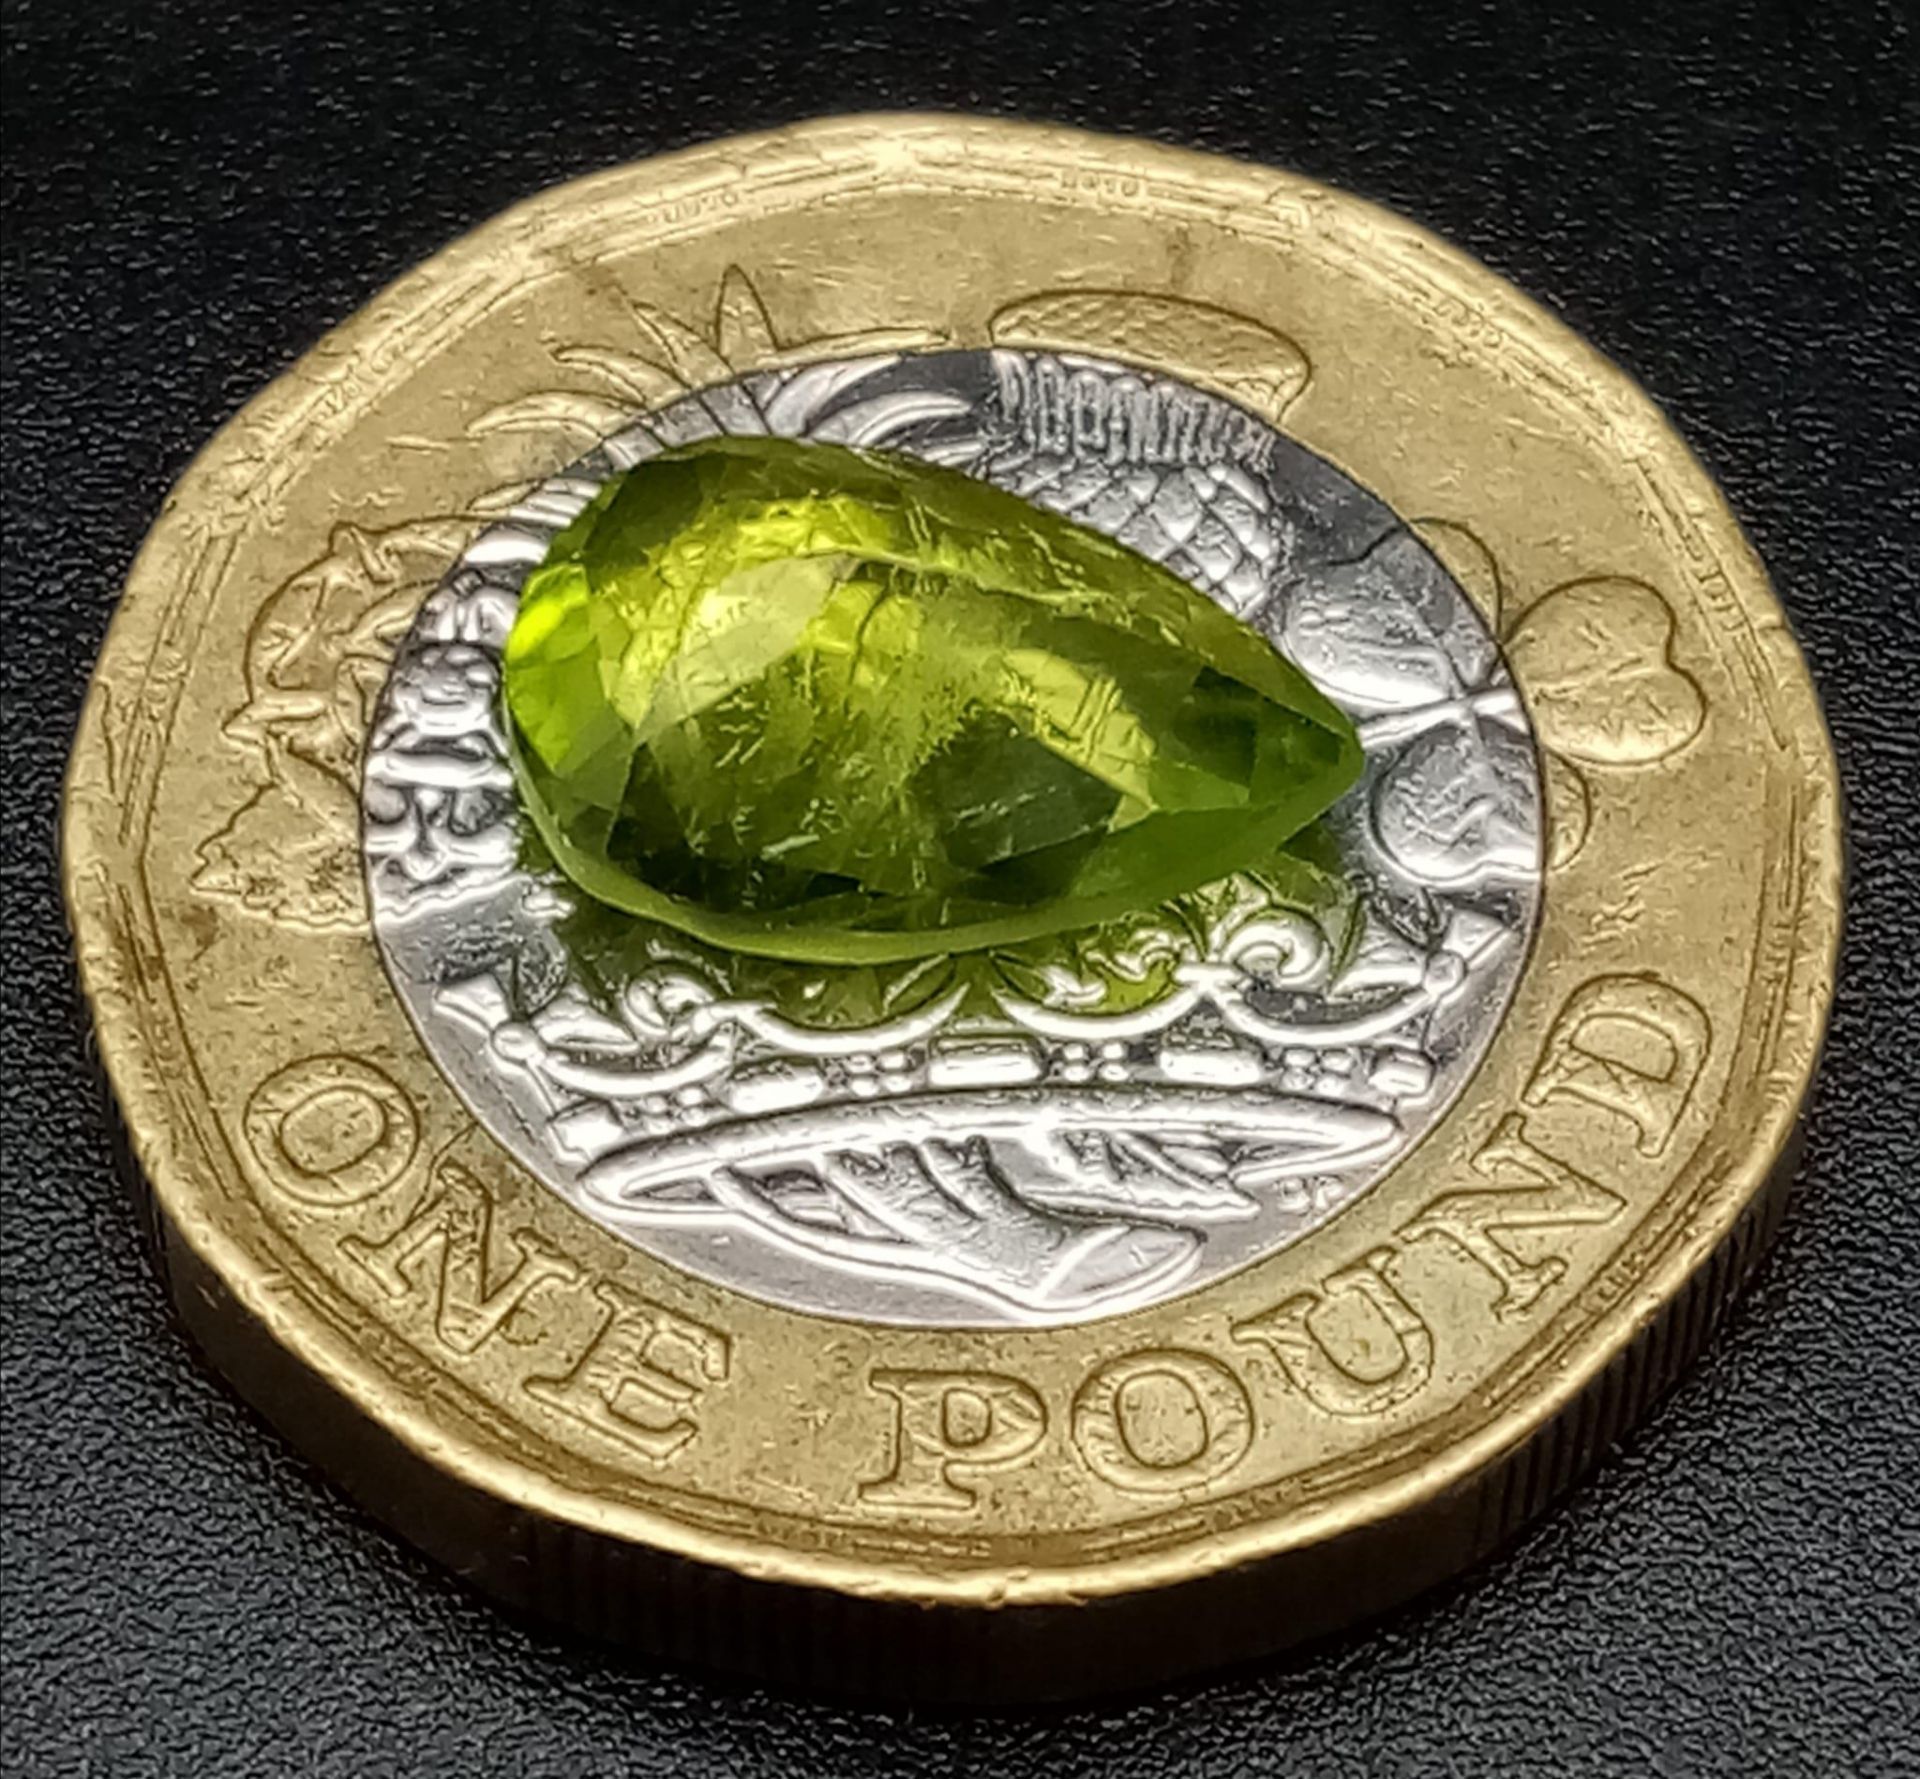 A 2.53ct Pakistani Peridot Gemstone. Pear shaped and comes with a GFCO Swiss Certificate. - Image 3 of 4